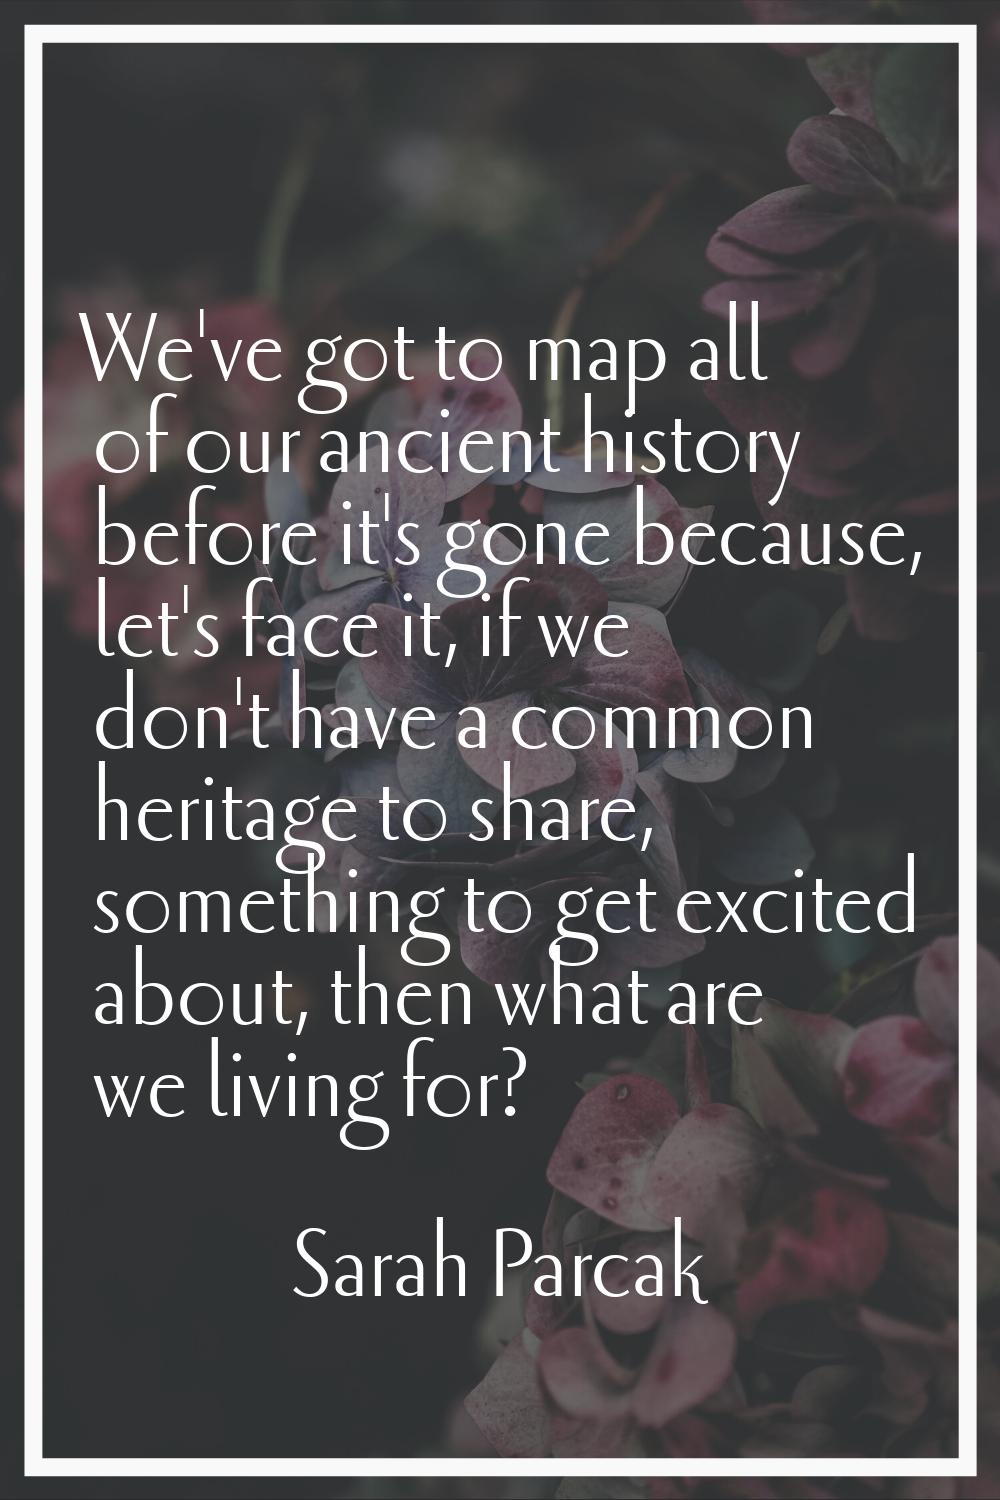 We've got to map all of our ancient history before it's gone because, let's face it, if we don't ha